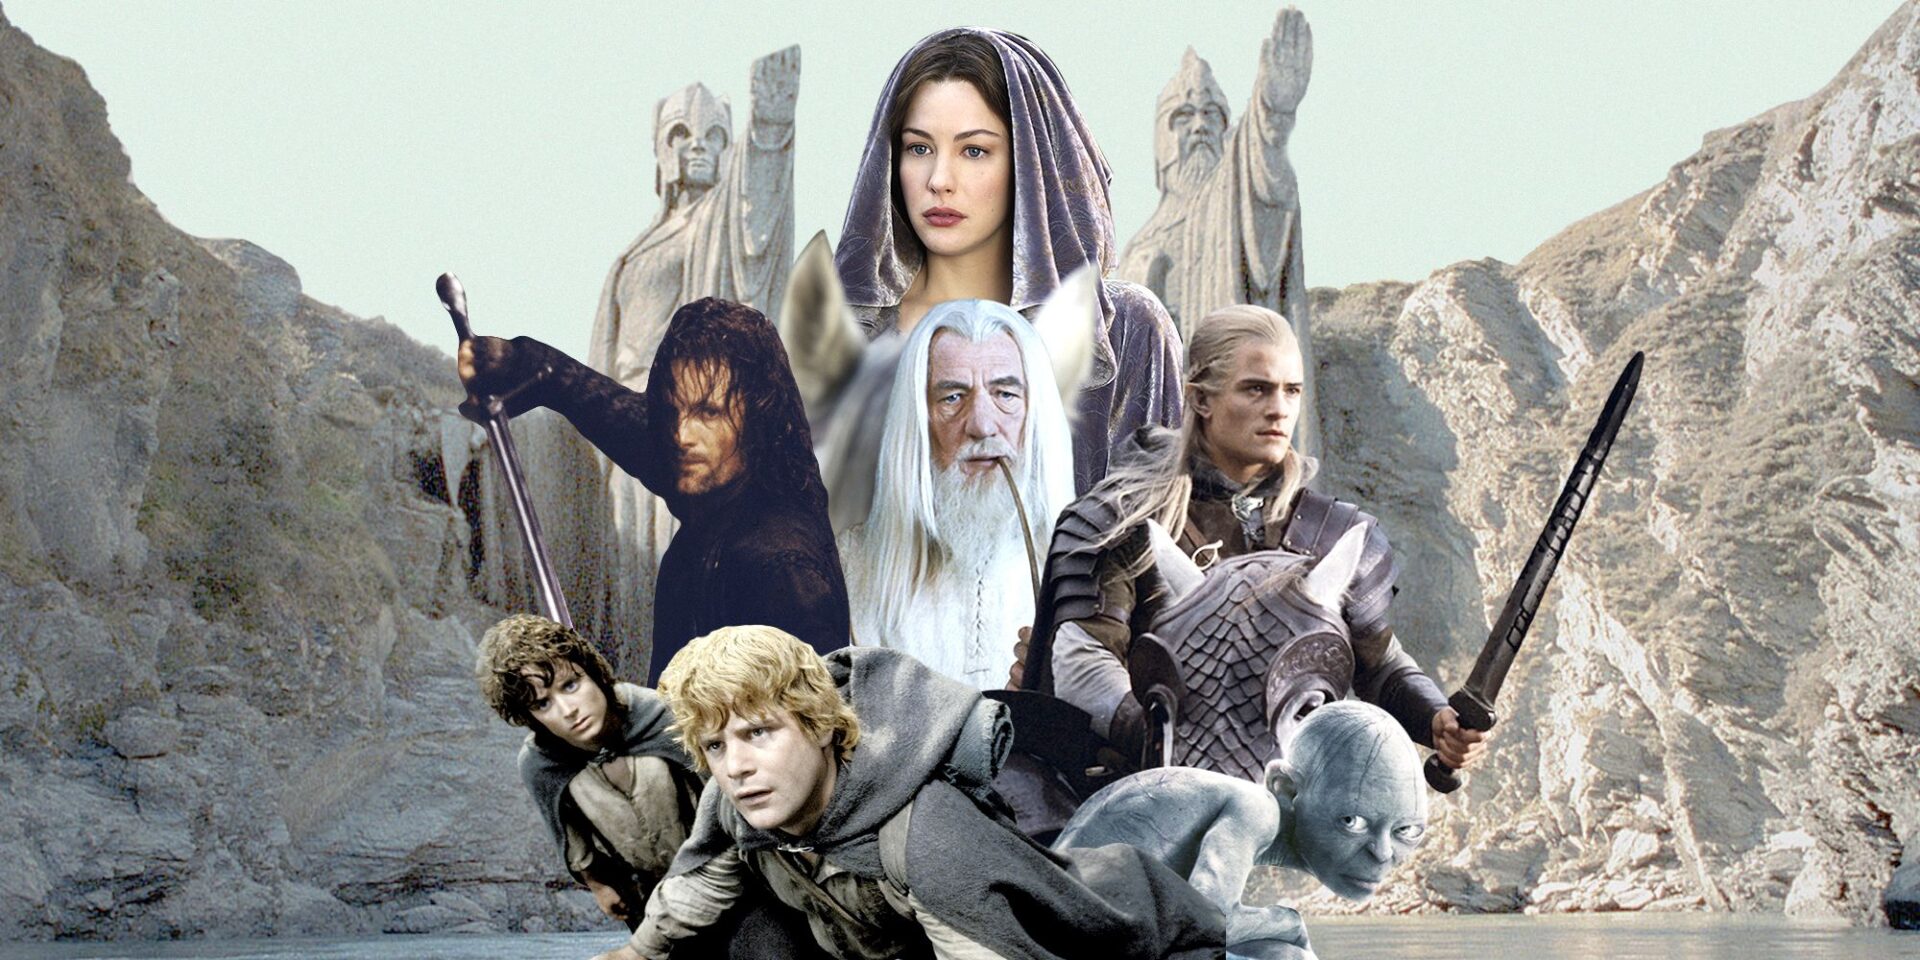 The Cinematic Journey of Middle-earth: A Comprehensive Analysis of ‘The Lord of the Rings’ Trilogy